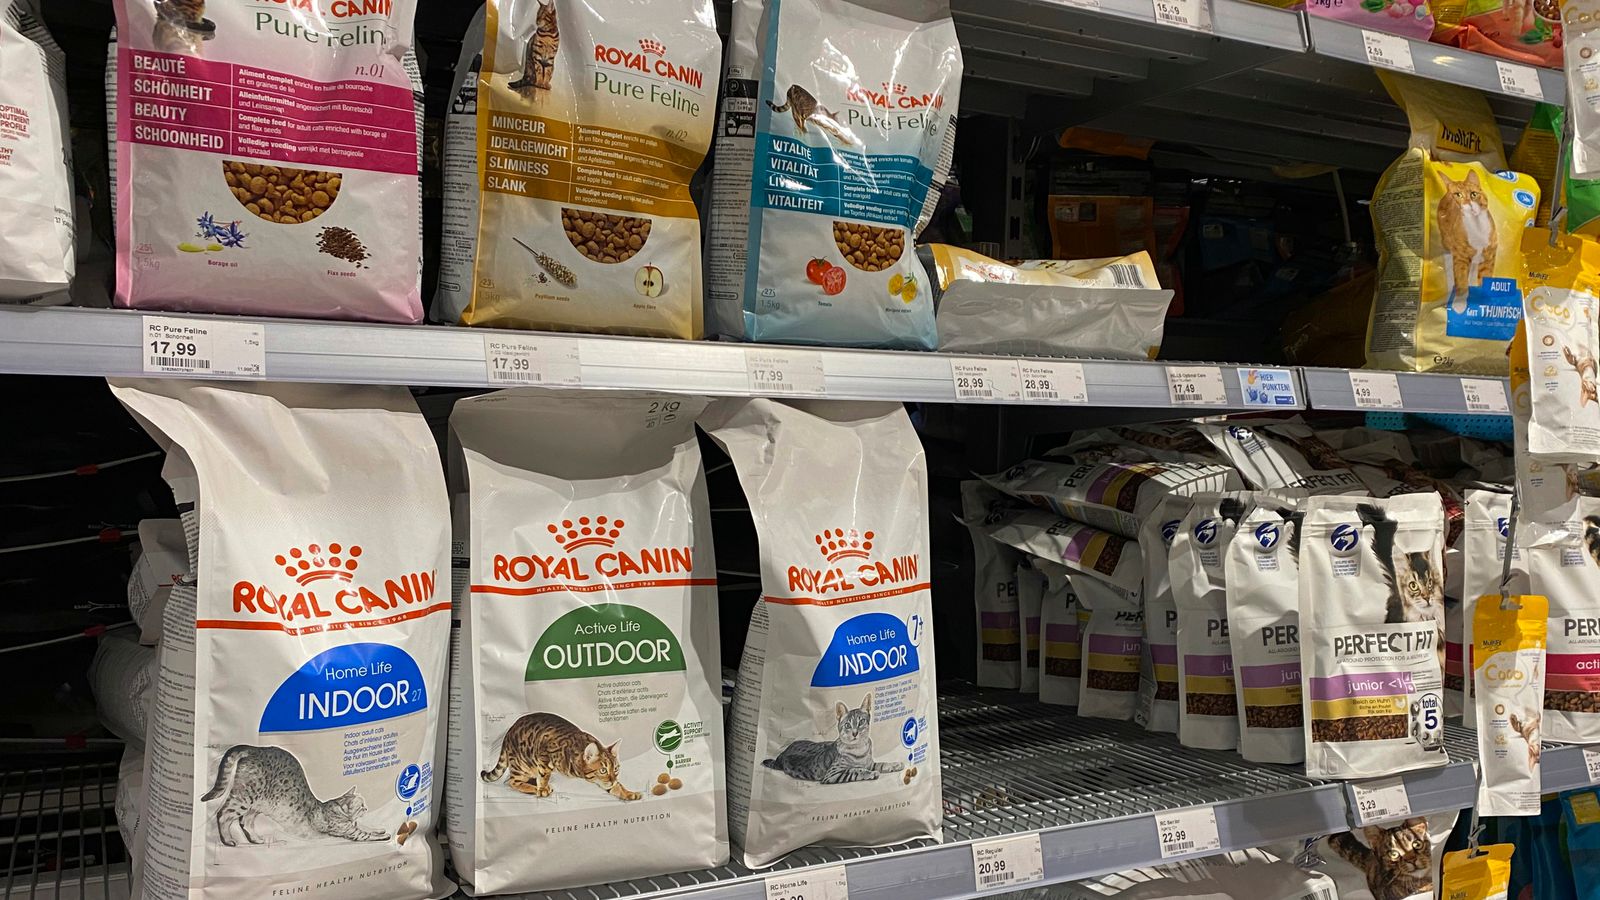 Pet food retailer Zooplus hits out at Royal Canin's 'excessive' price increases - and offers customers 10% off its competitors